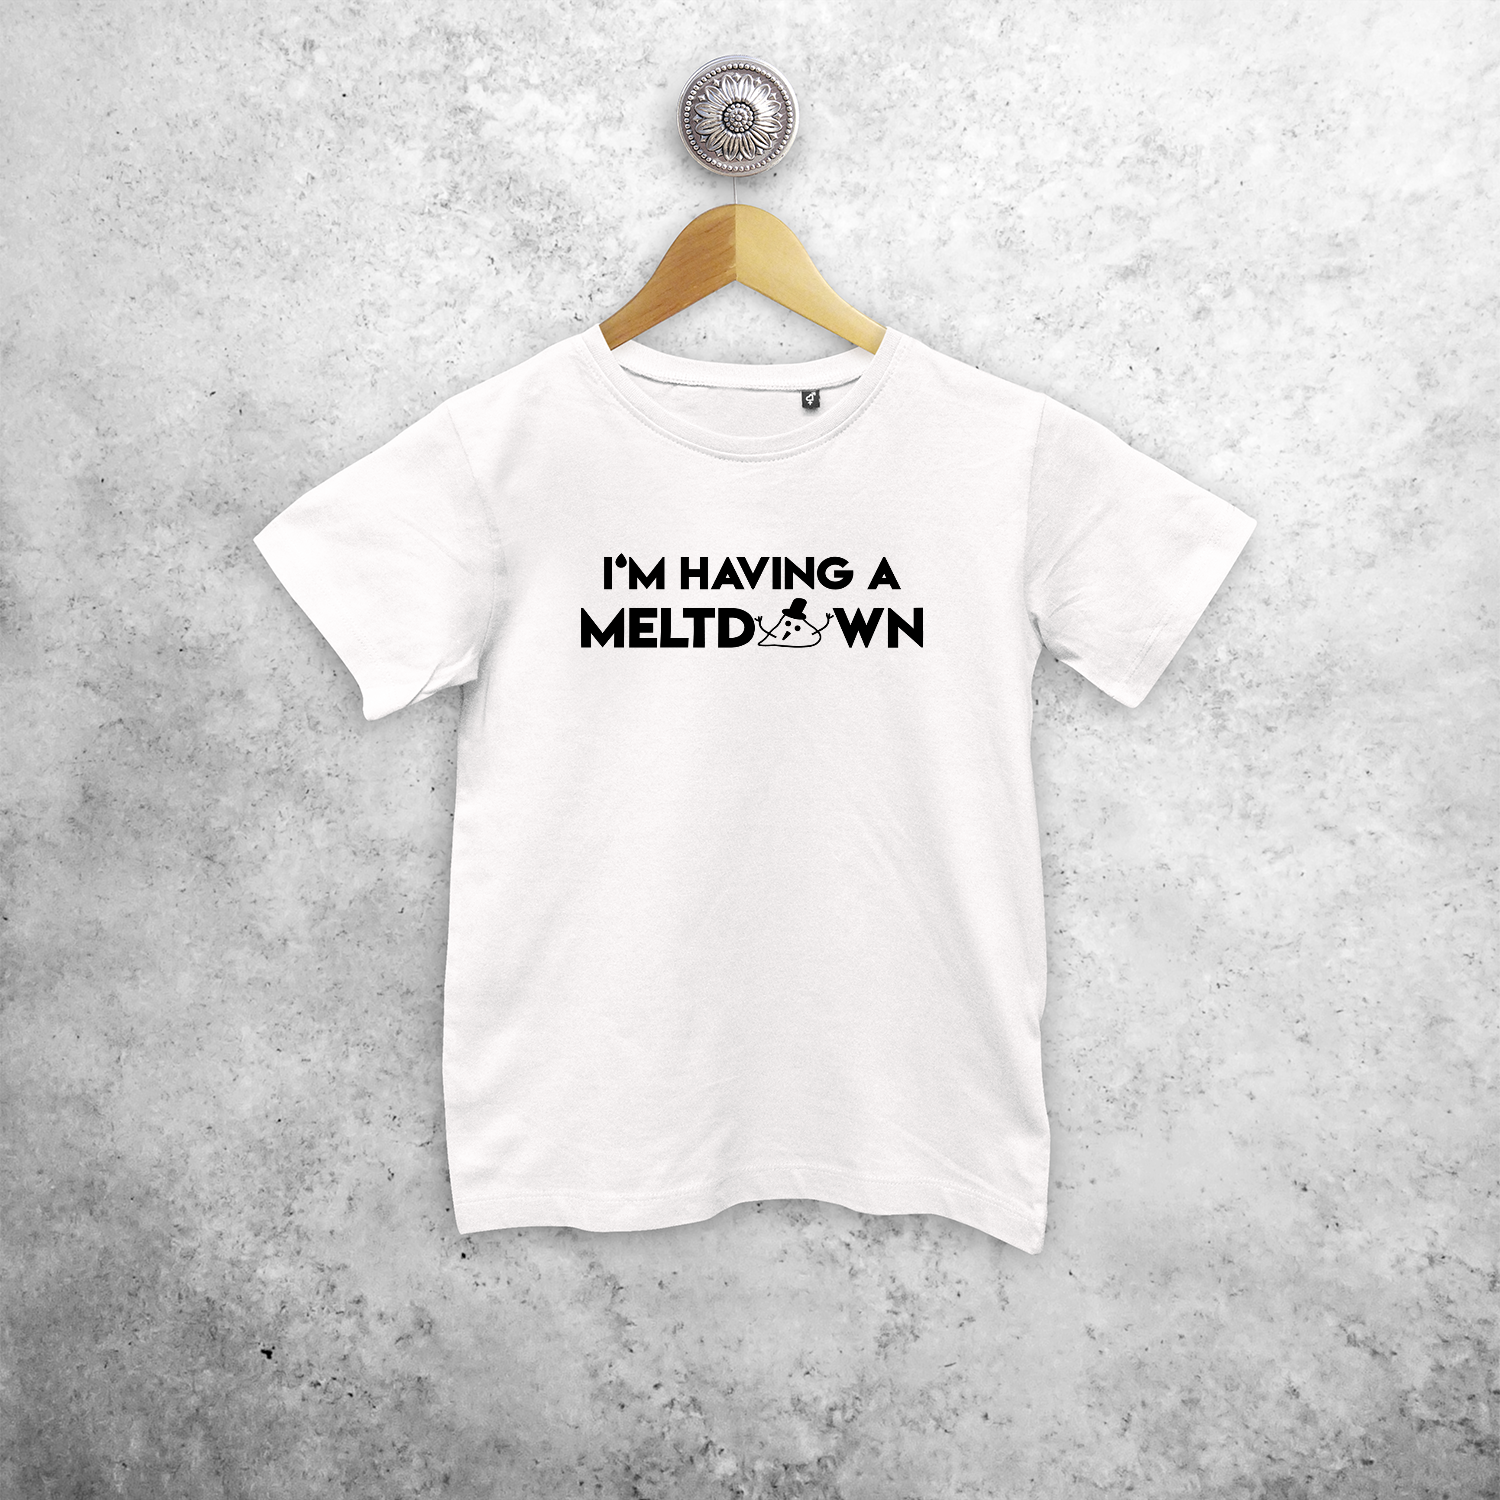 Kids shirt with short sleeves, with ‘I’m having a meltdown’ print by KMLeon.